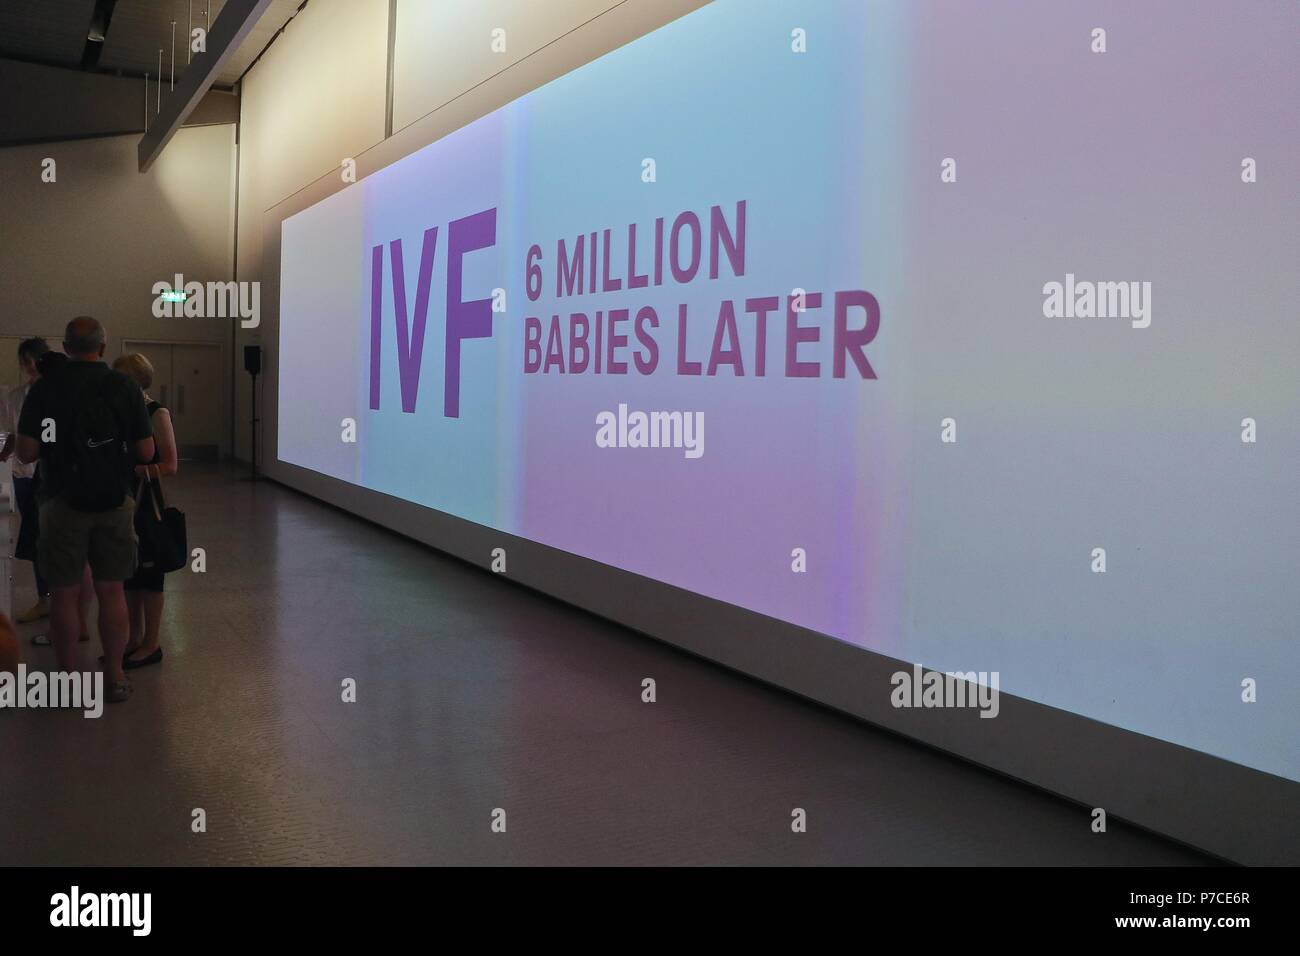 Science MUSEUM celebrates 40 years of IVF with new exhibition 5 July - November 2018 Stock Photo